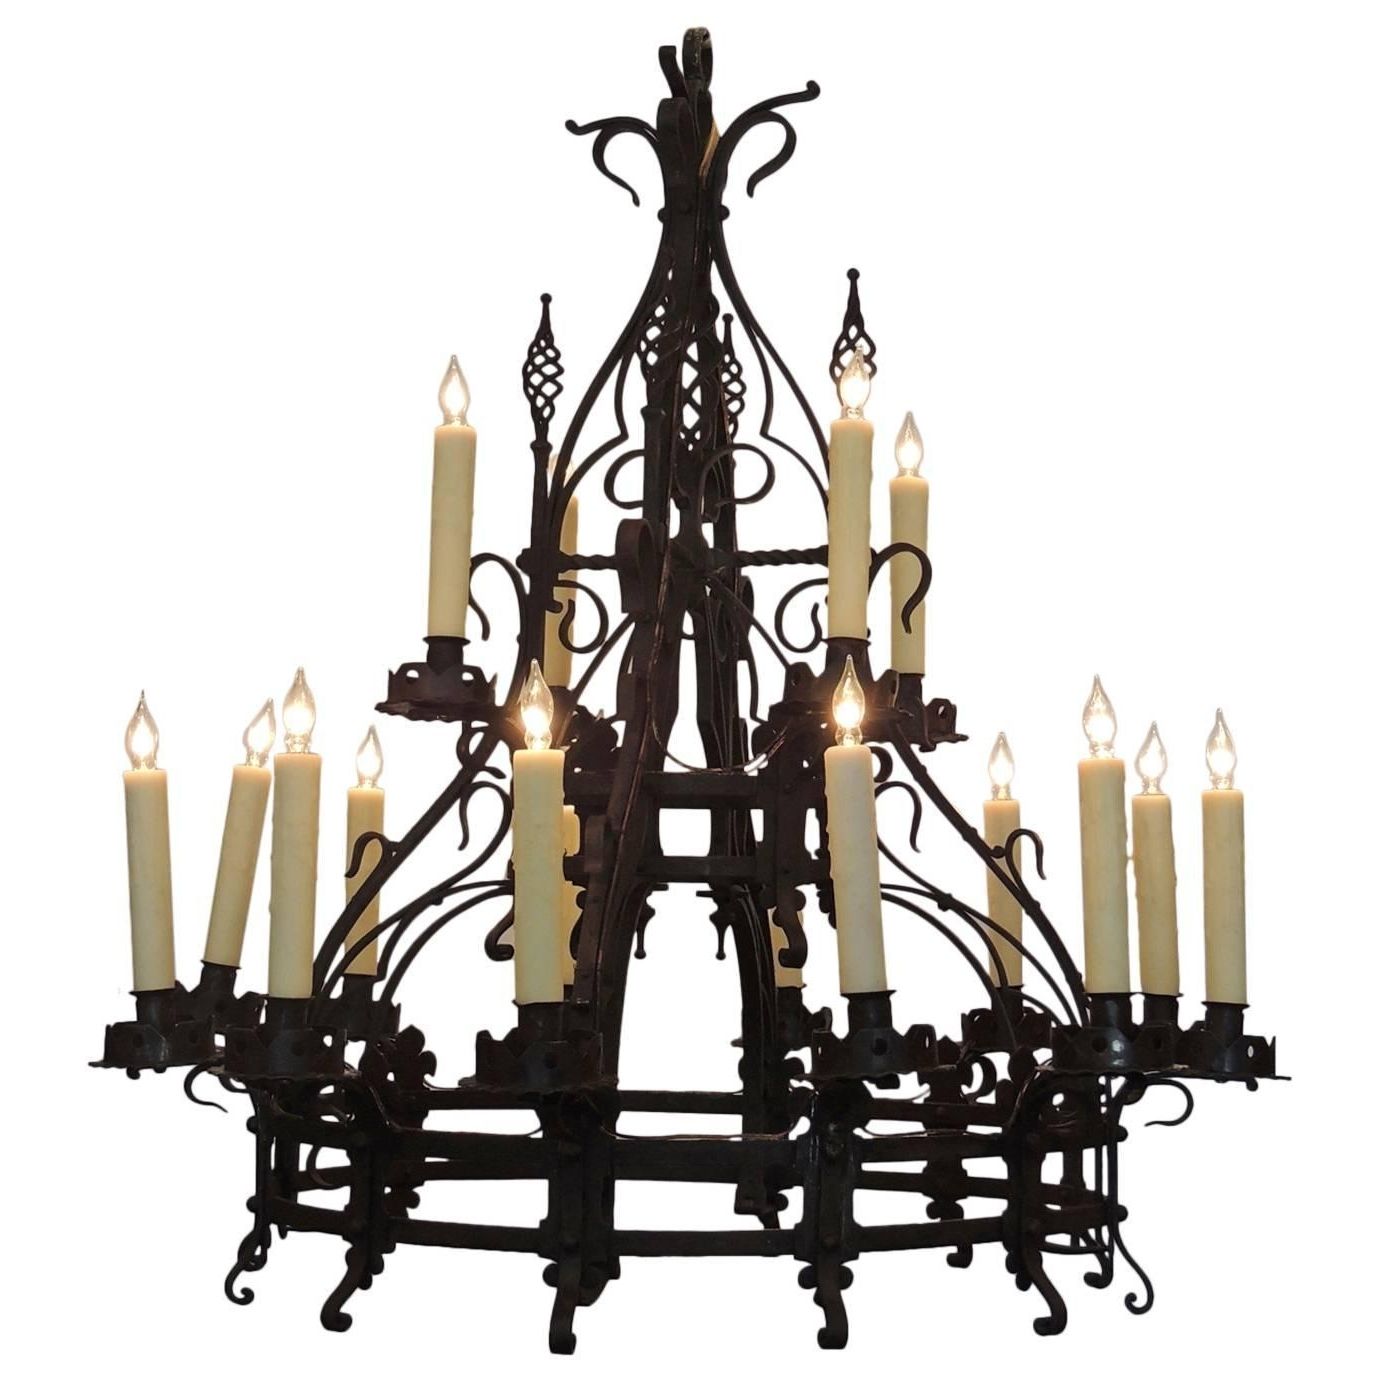 Popular Late 19th C French Gothic Wrought Iron Chandelier For Sale At 1stdibs With Regard To Wrought Iron Chandeliers (View 11 of 15)